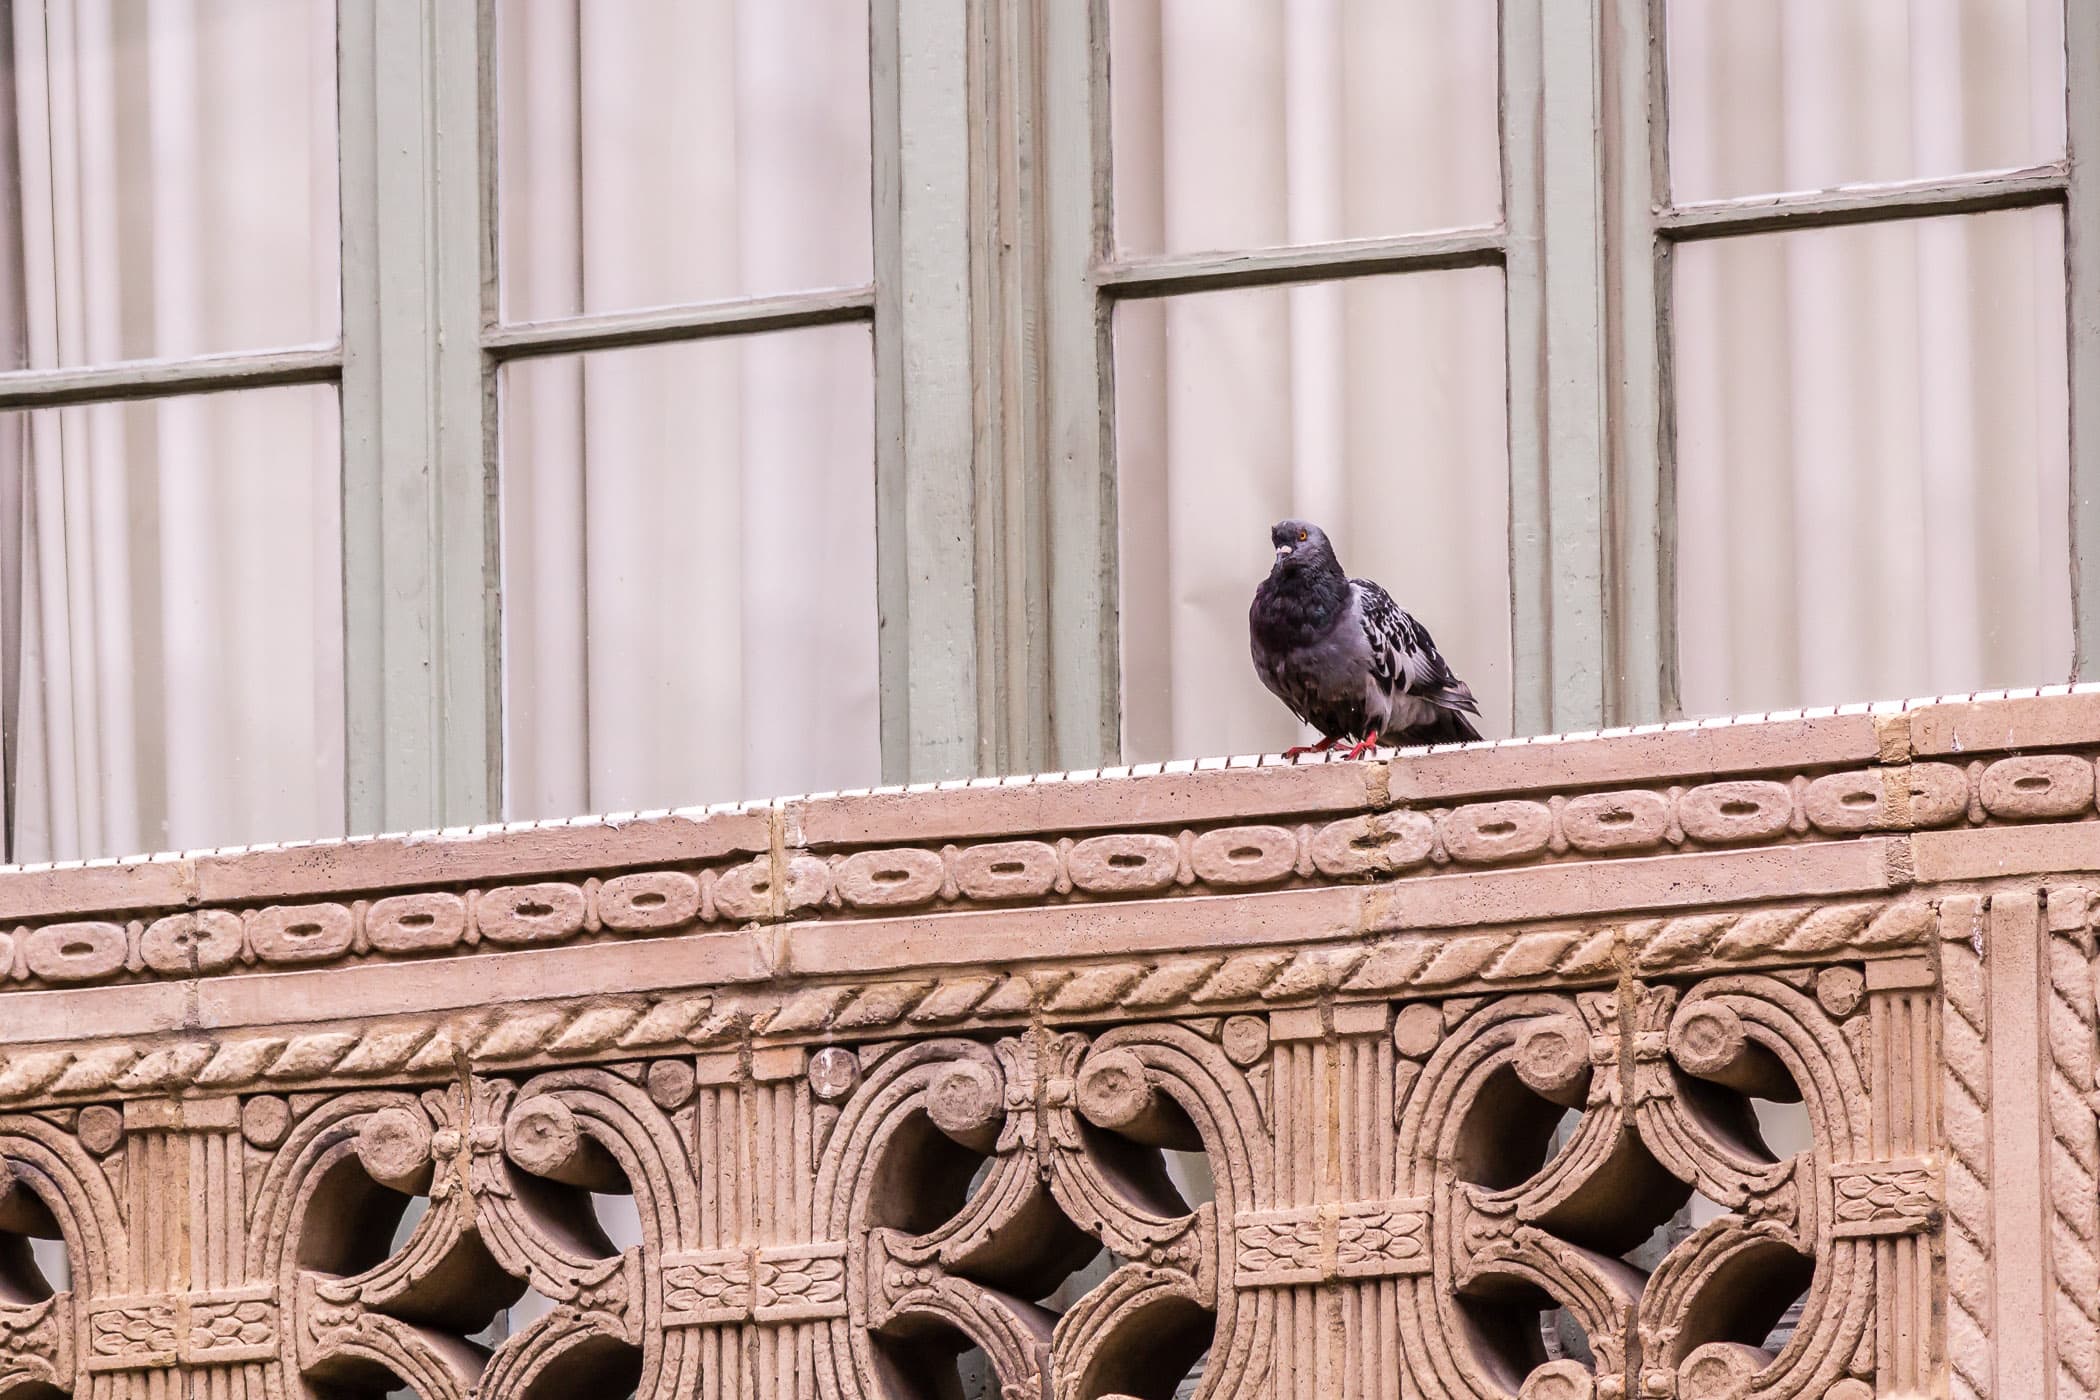 A pigeon surveys the goings-on below on the streets of Downtown Fort Worth, Texas.